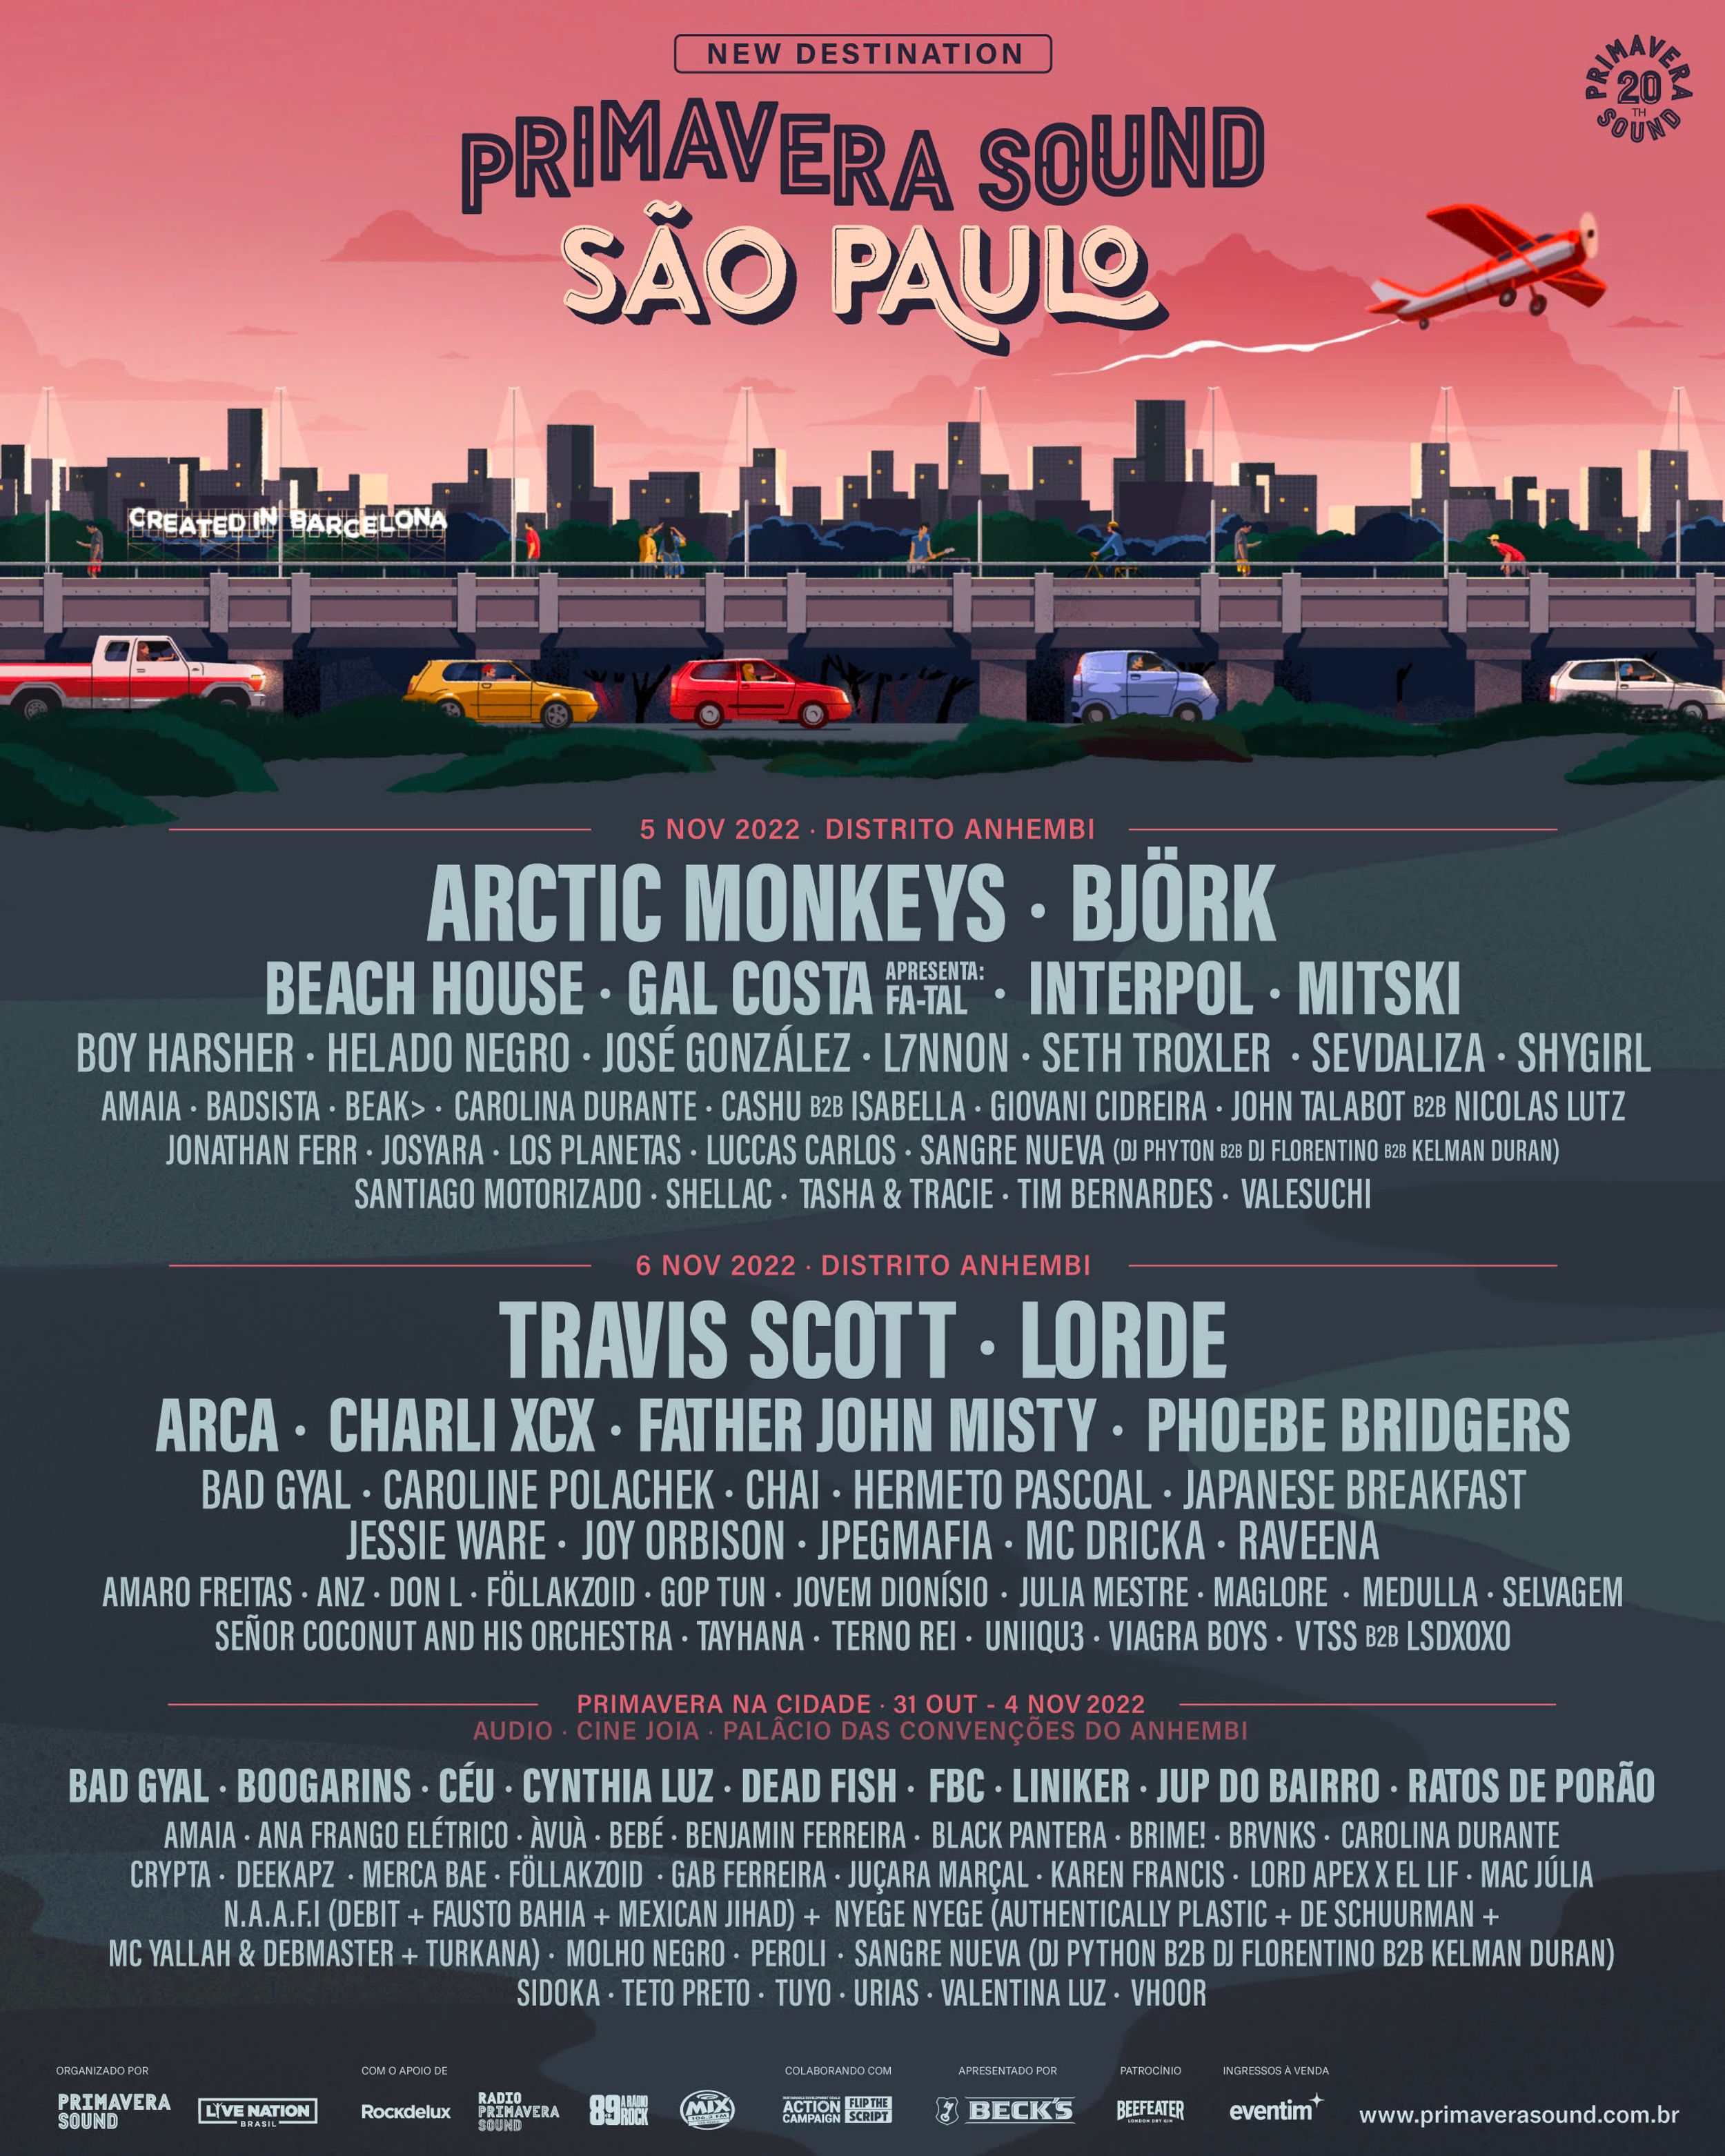 Here it is the official lineup of Primavera Sound São Paulo's first edition